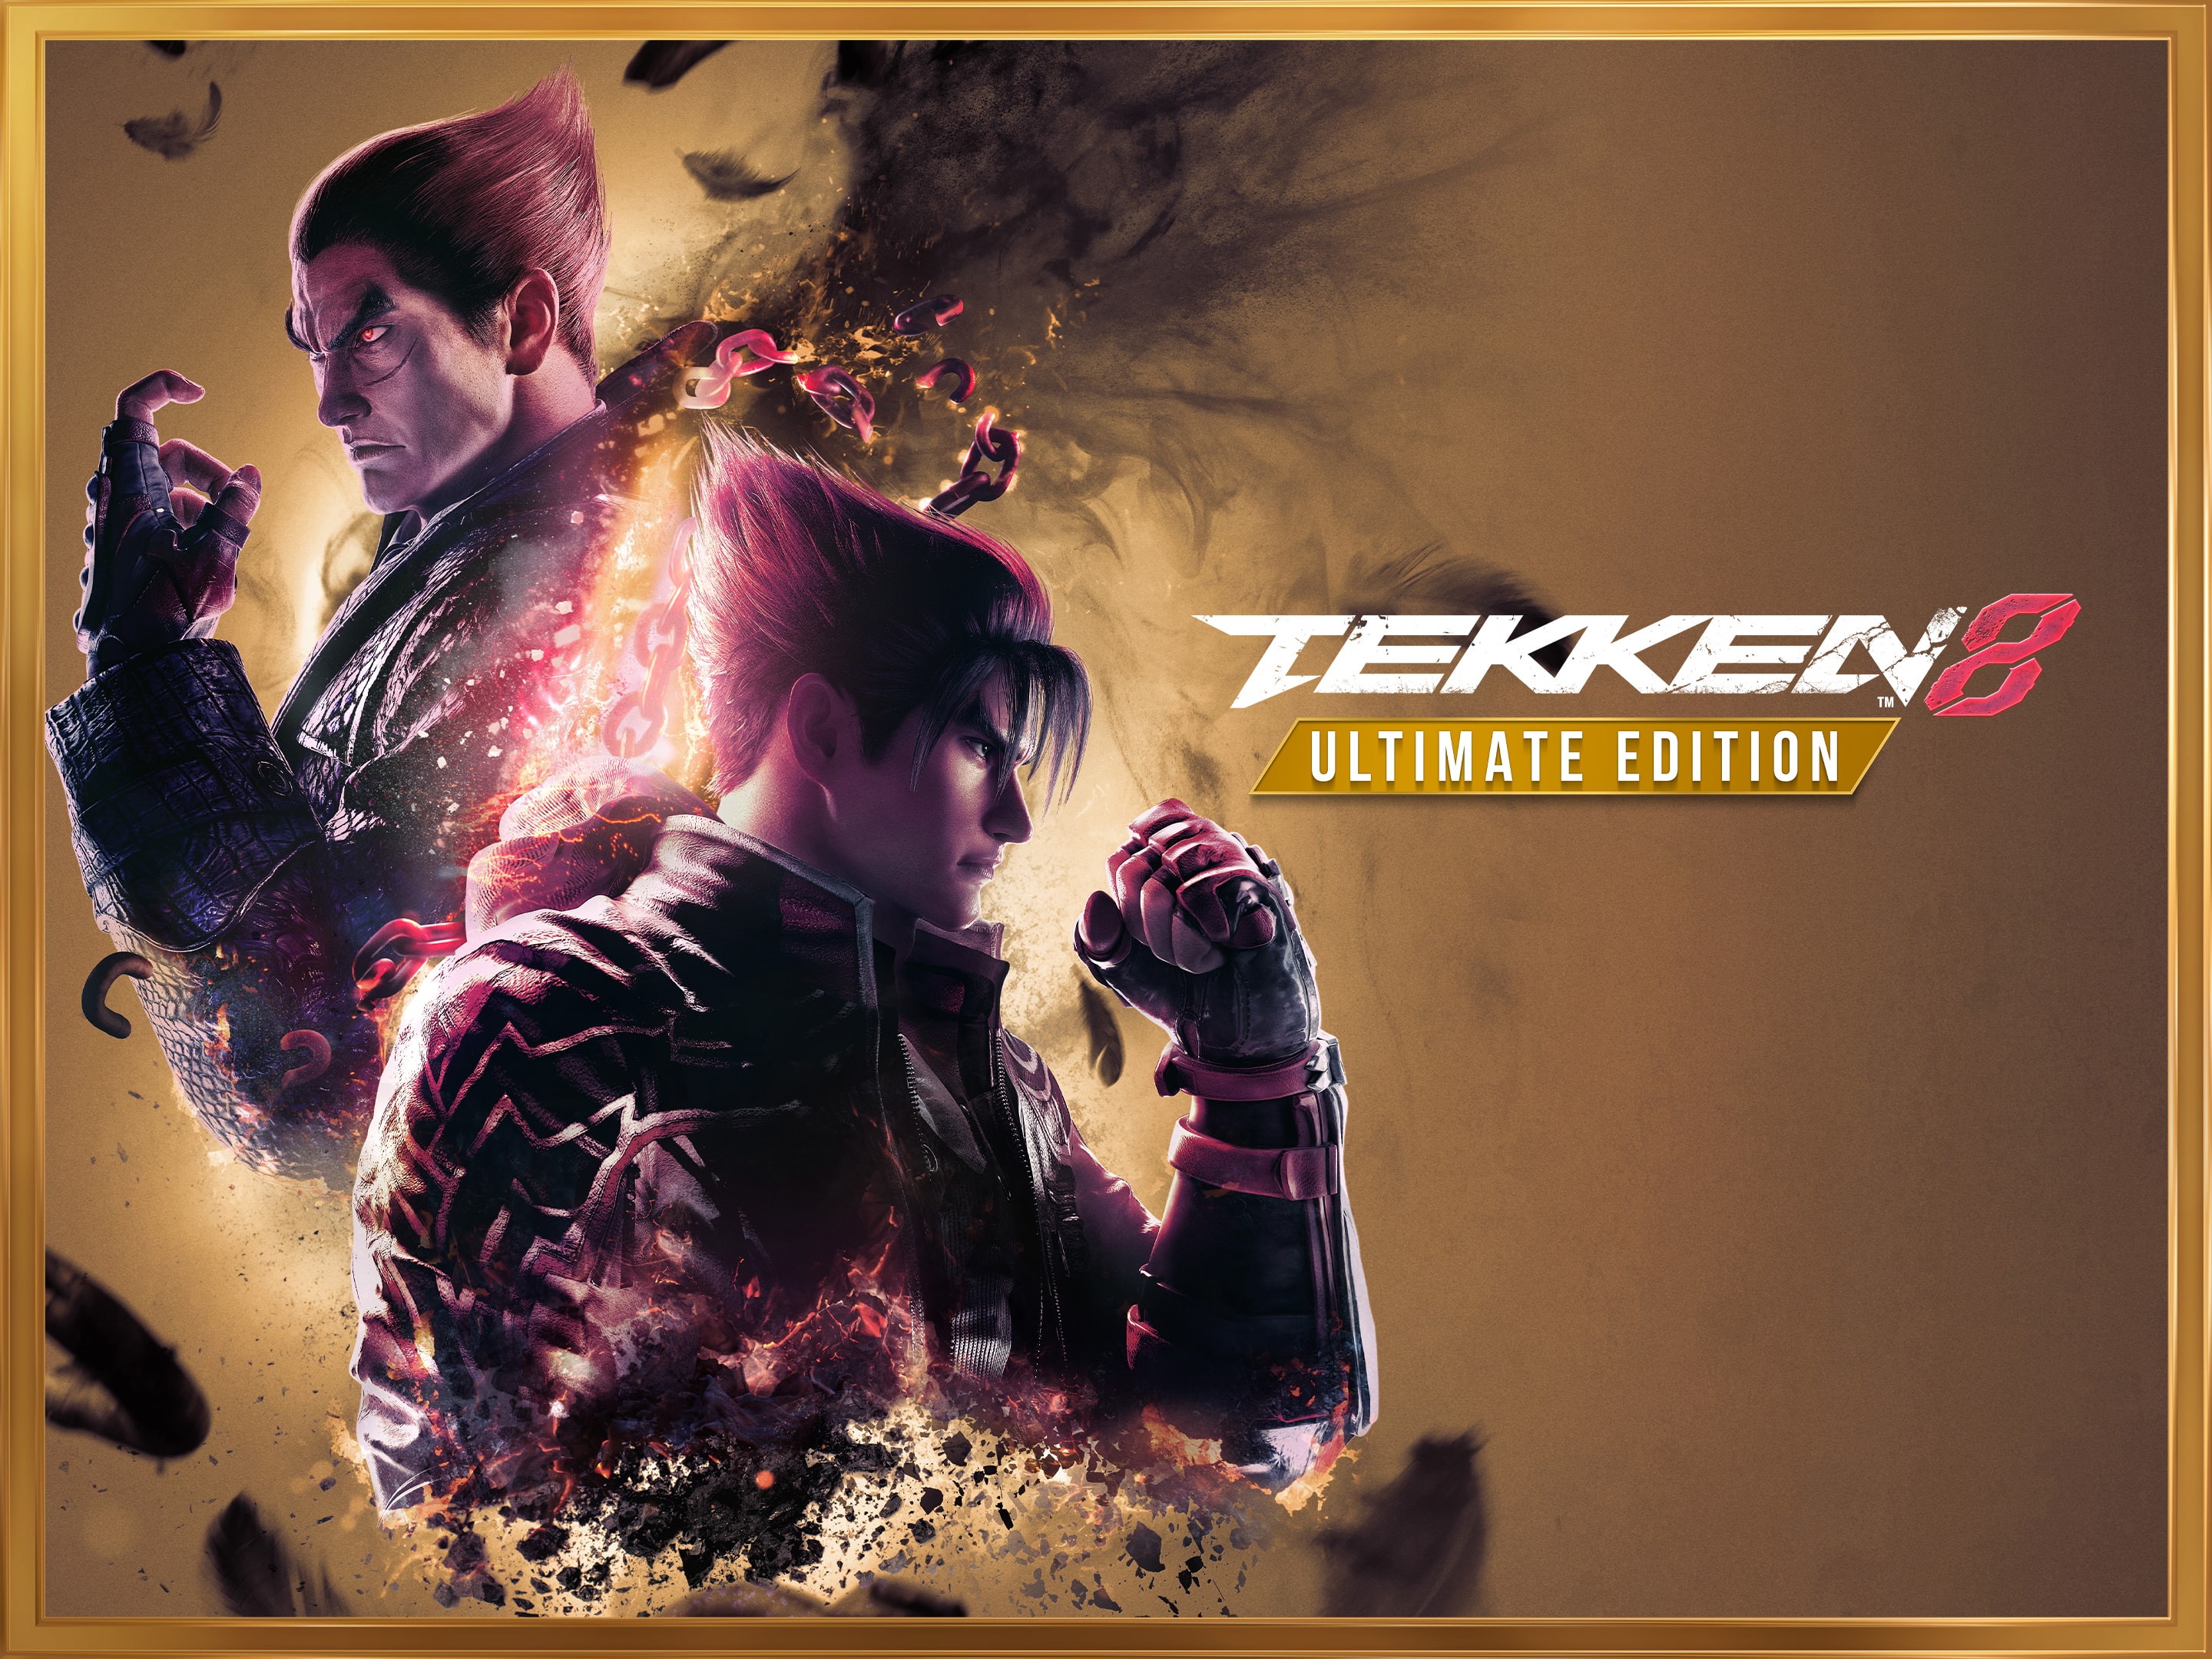 TEKKEN 8 LAUNCH LIMITED EDITION (DAY 1 EDITION) PS5 